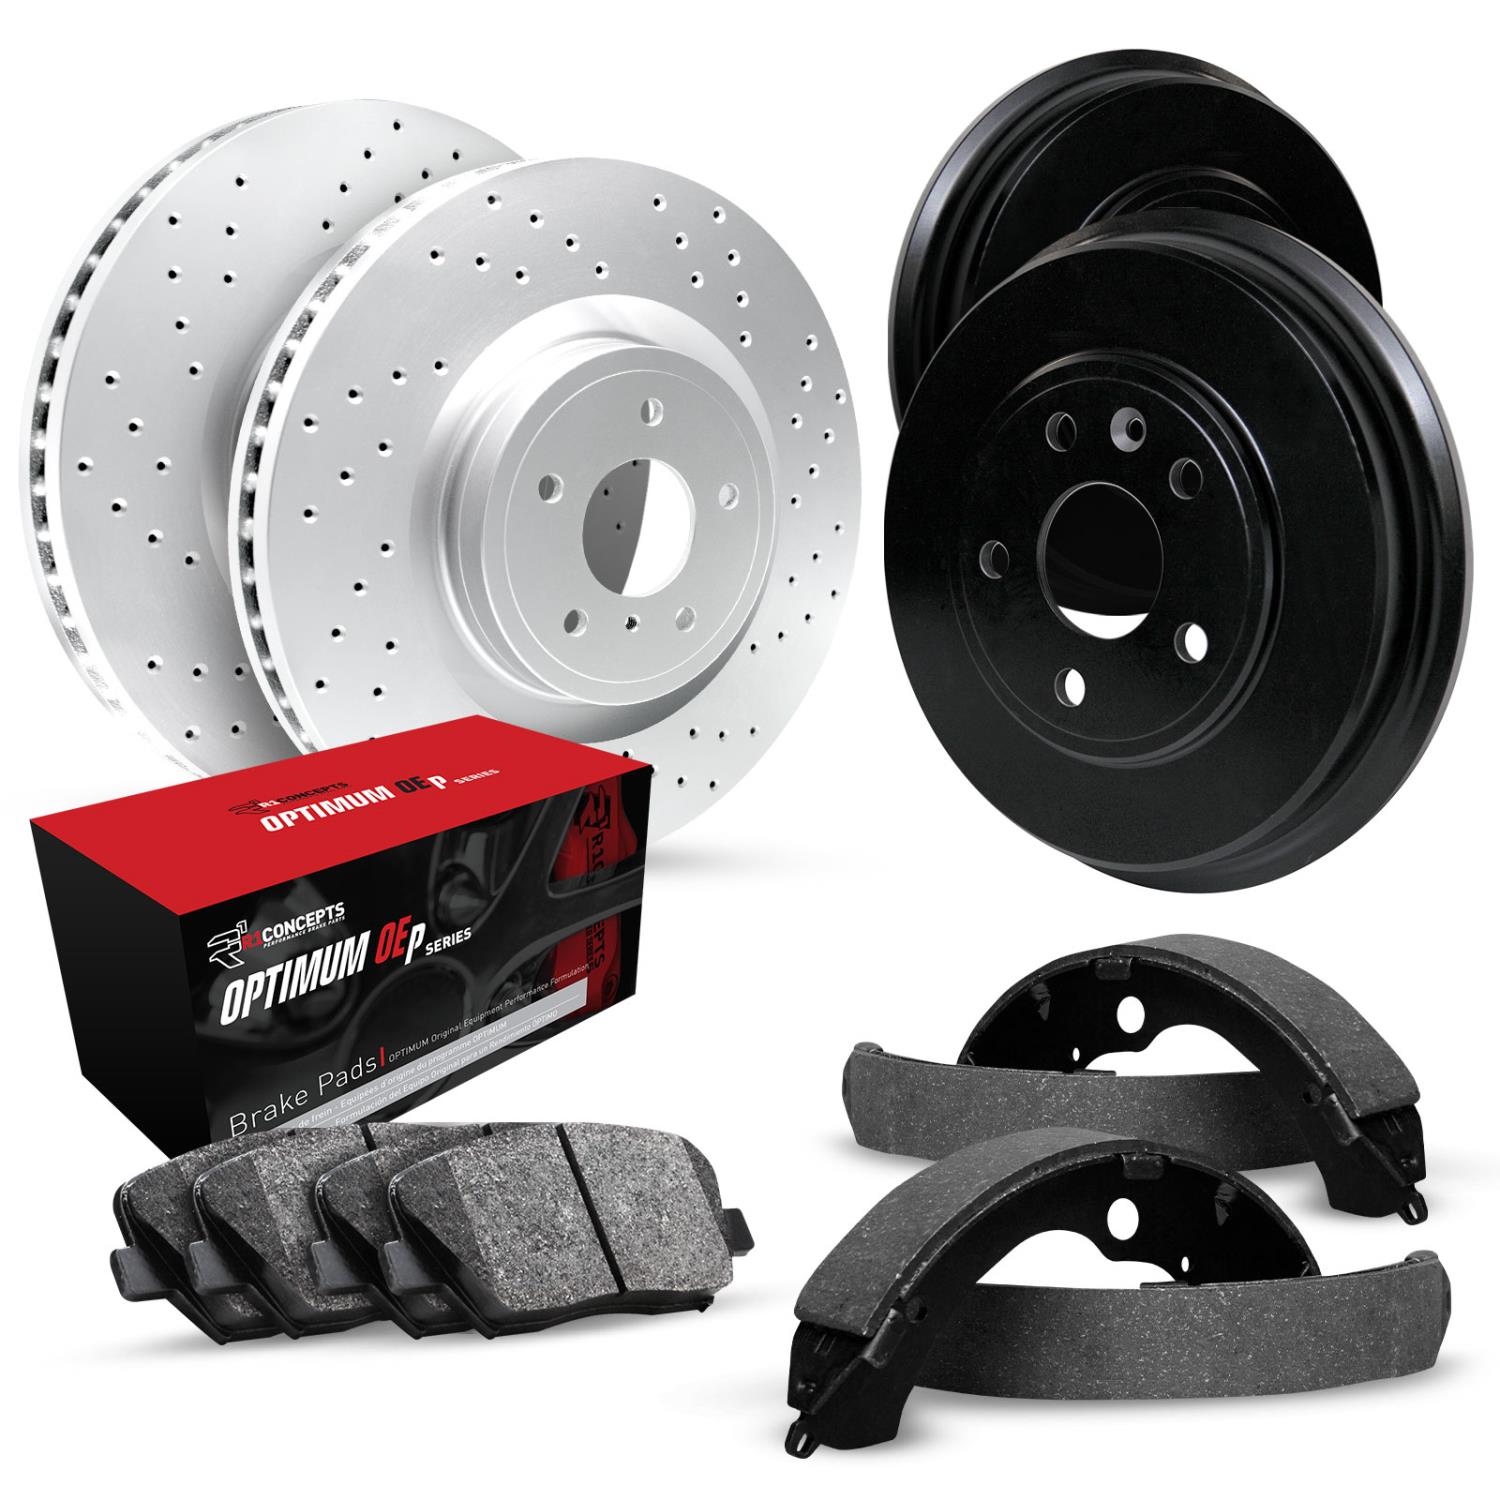 GEO-Carbon Drilled Brake Rotor & Drum Set w/Optimum OE Pads & Shoes, 2000-2001 Infiniti/Nissan, Position: Front & Rear